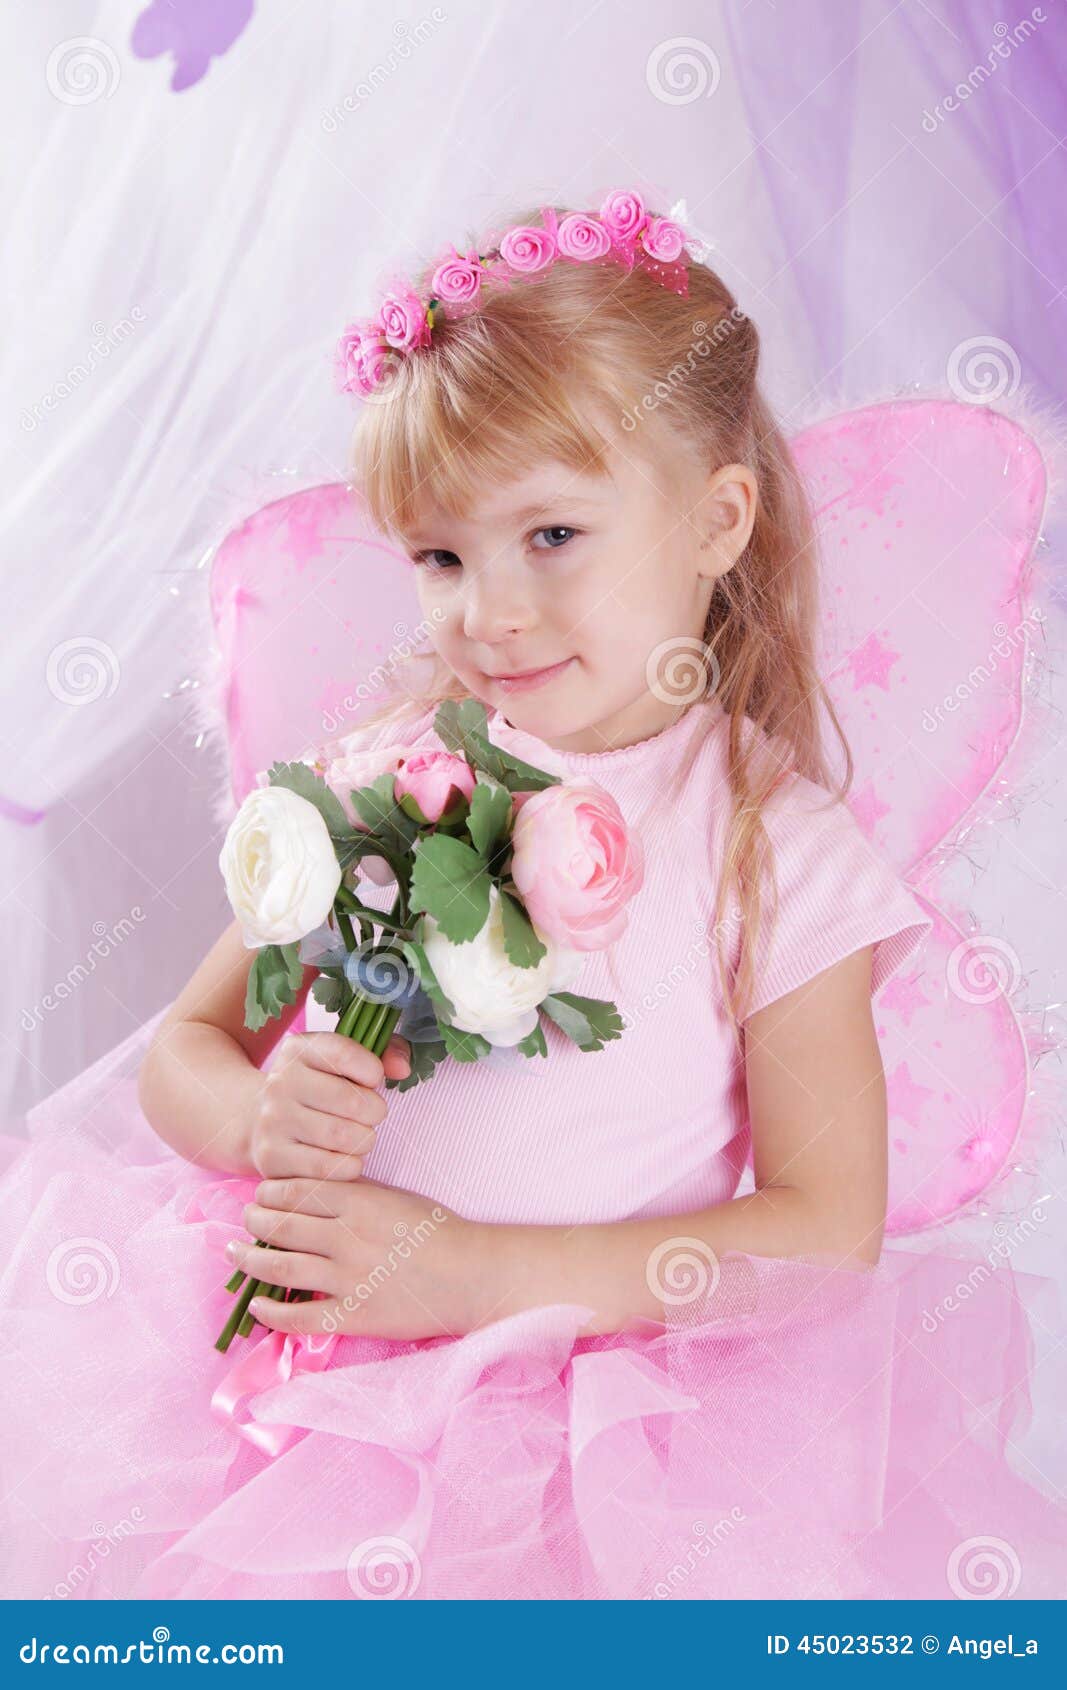 Butterfly Girl in Wreath Holding Roses Stock Photo - Image of alone ...